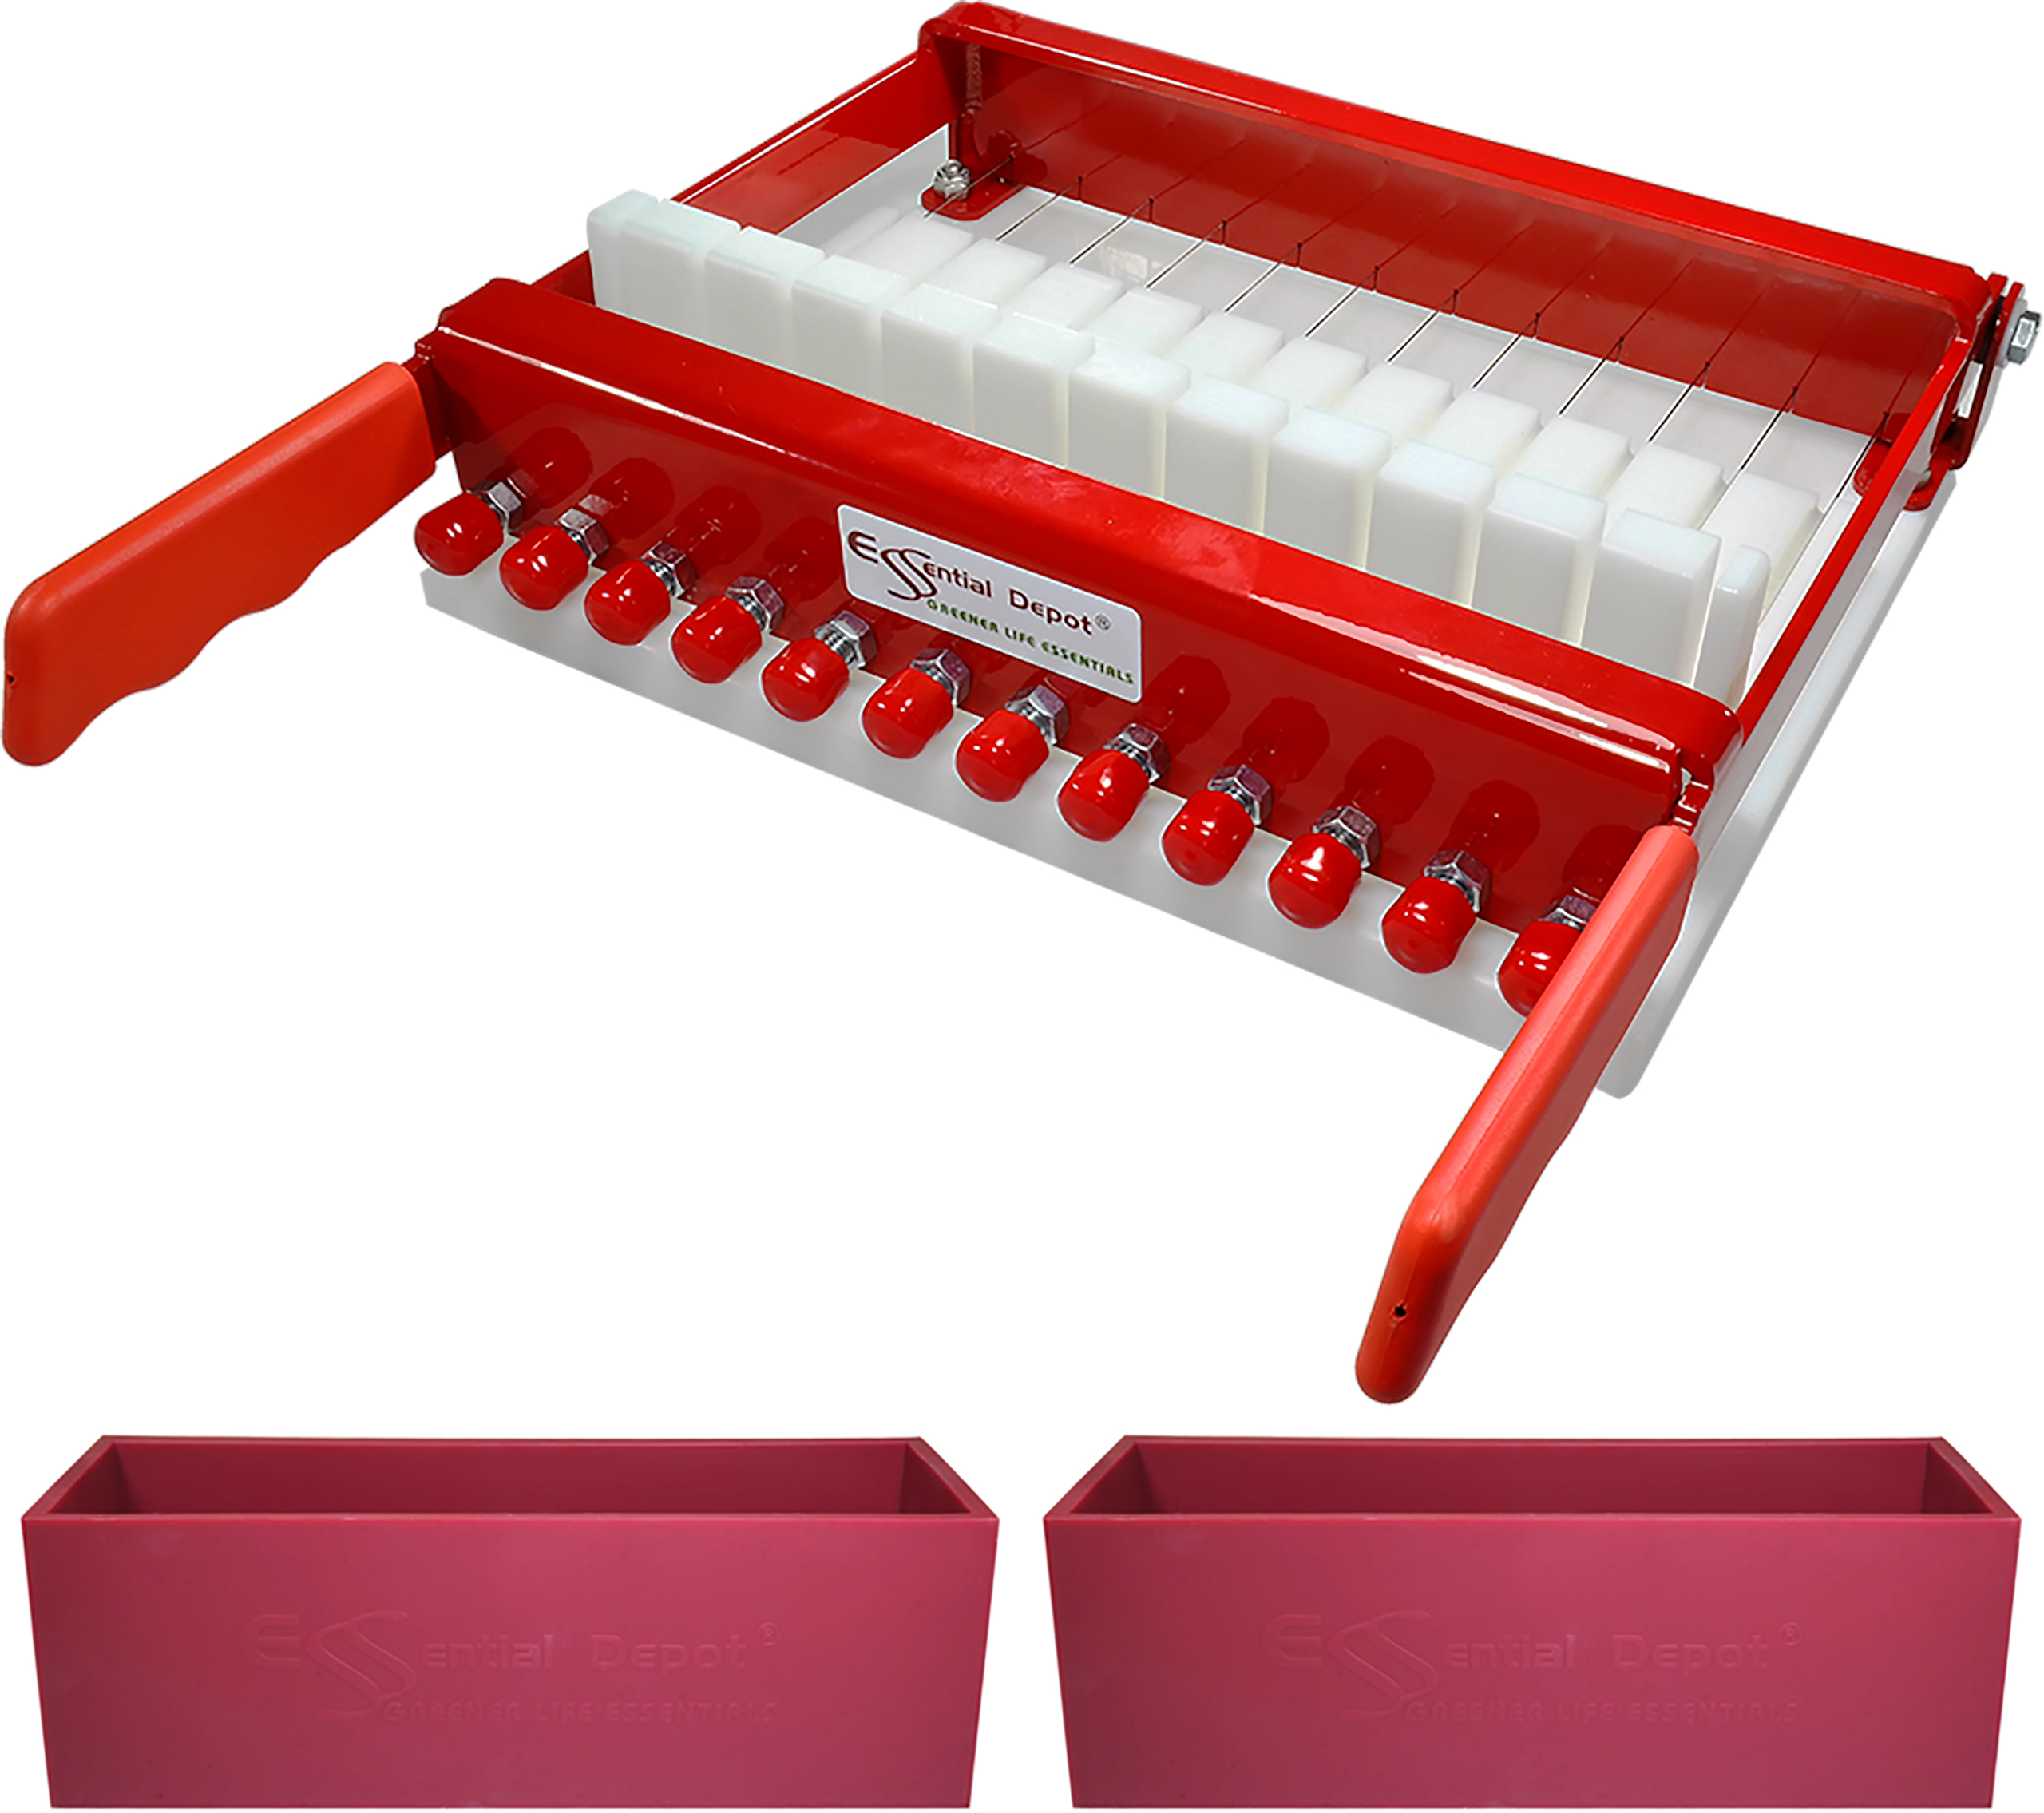 Soap Cutter + 2 RED Silicone Soap Molds: Essential Depot